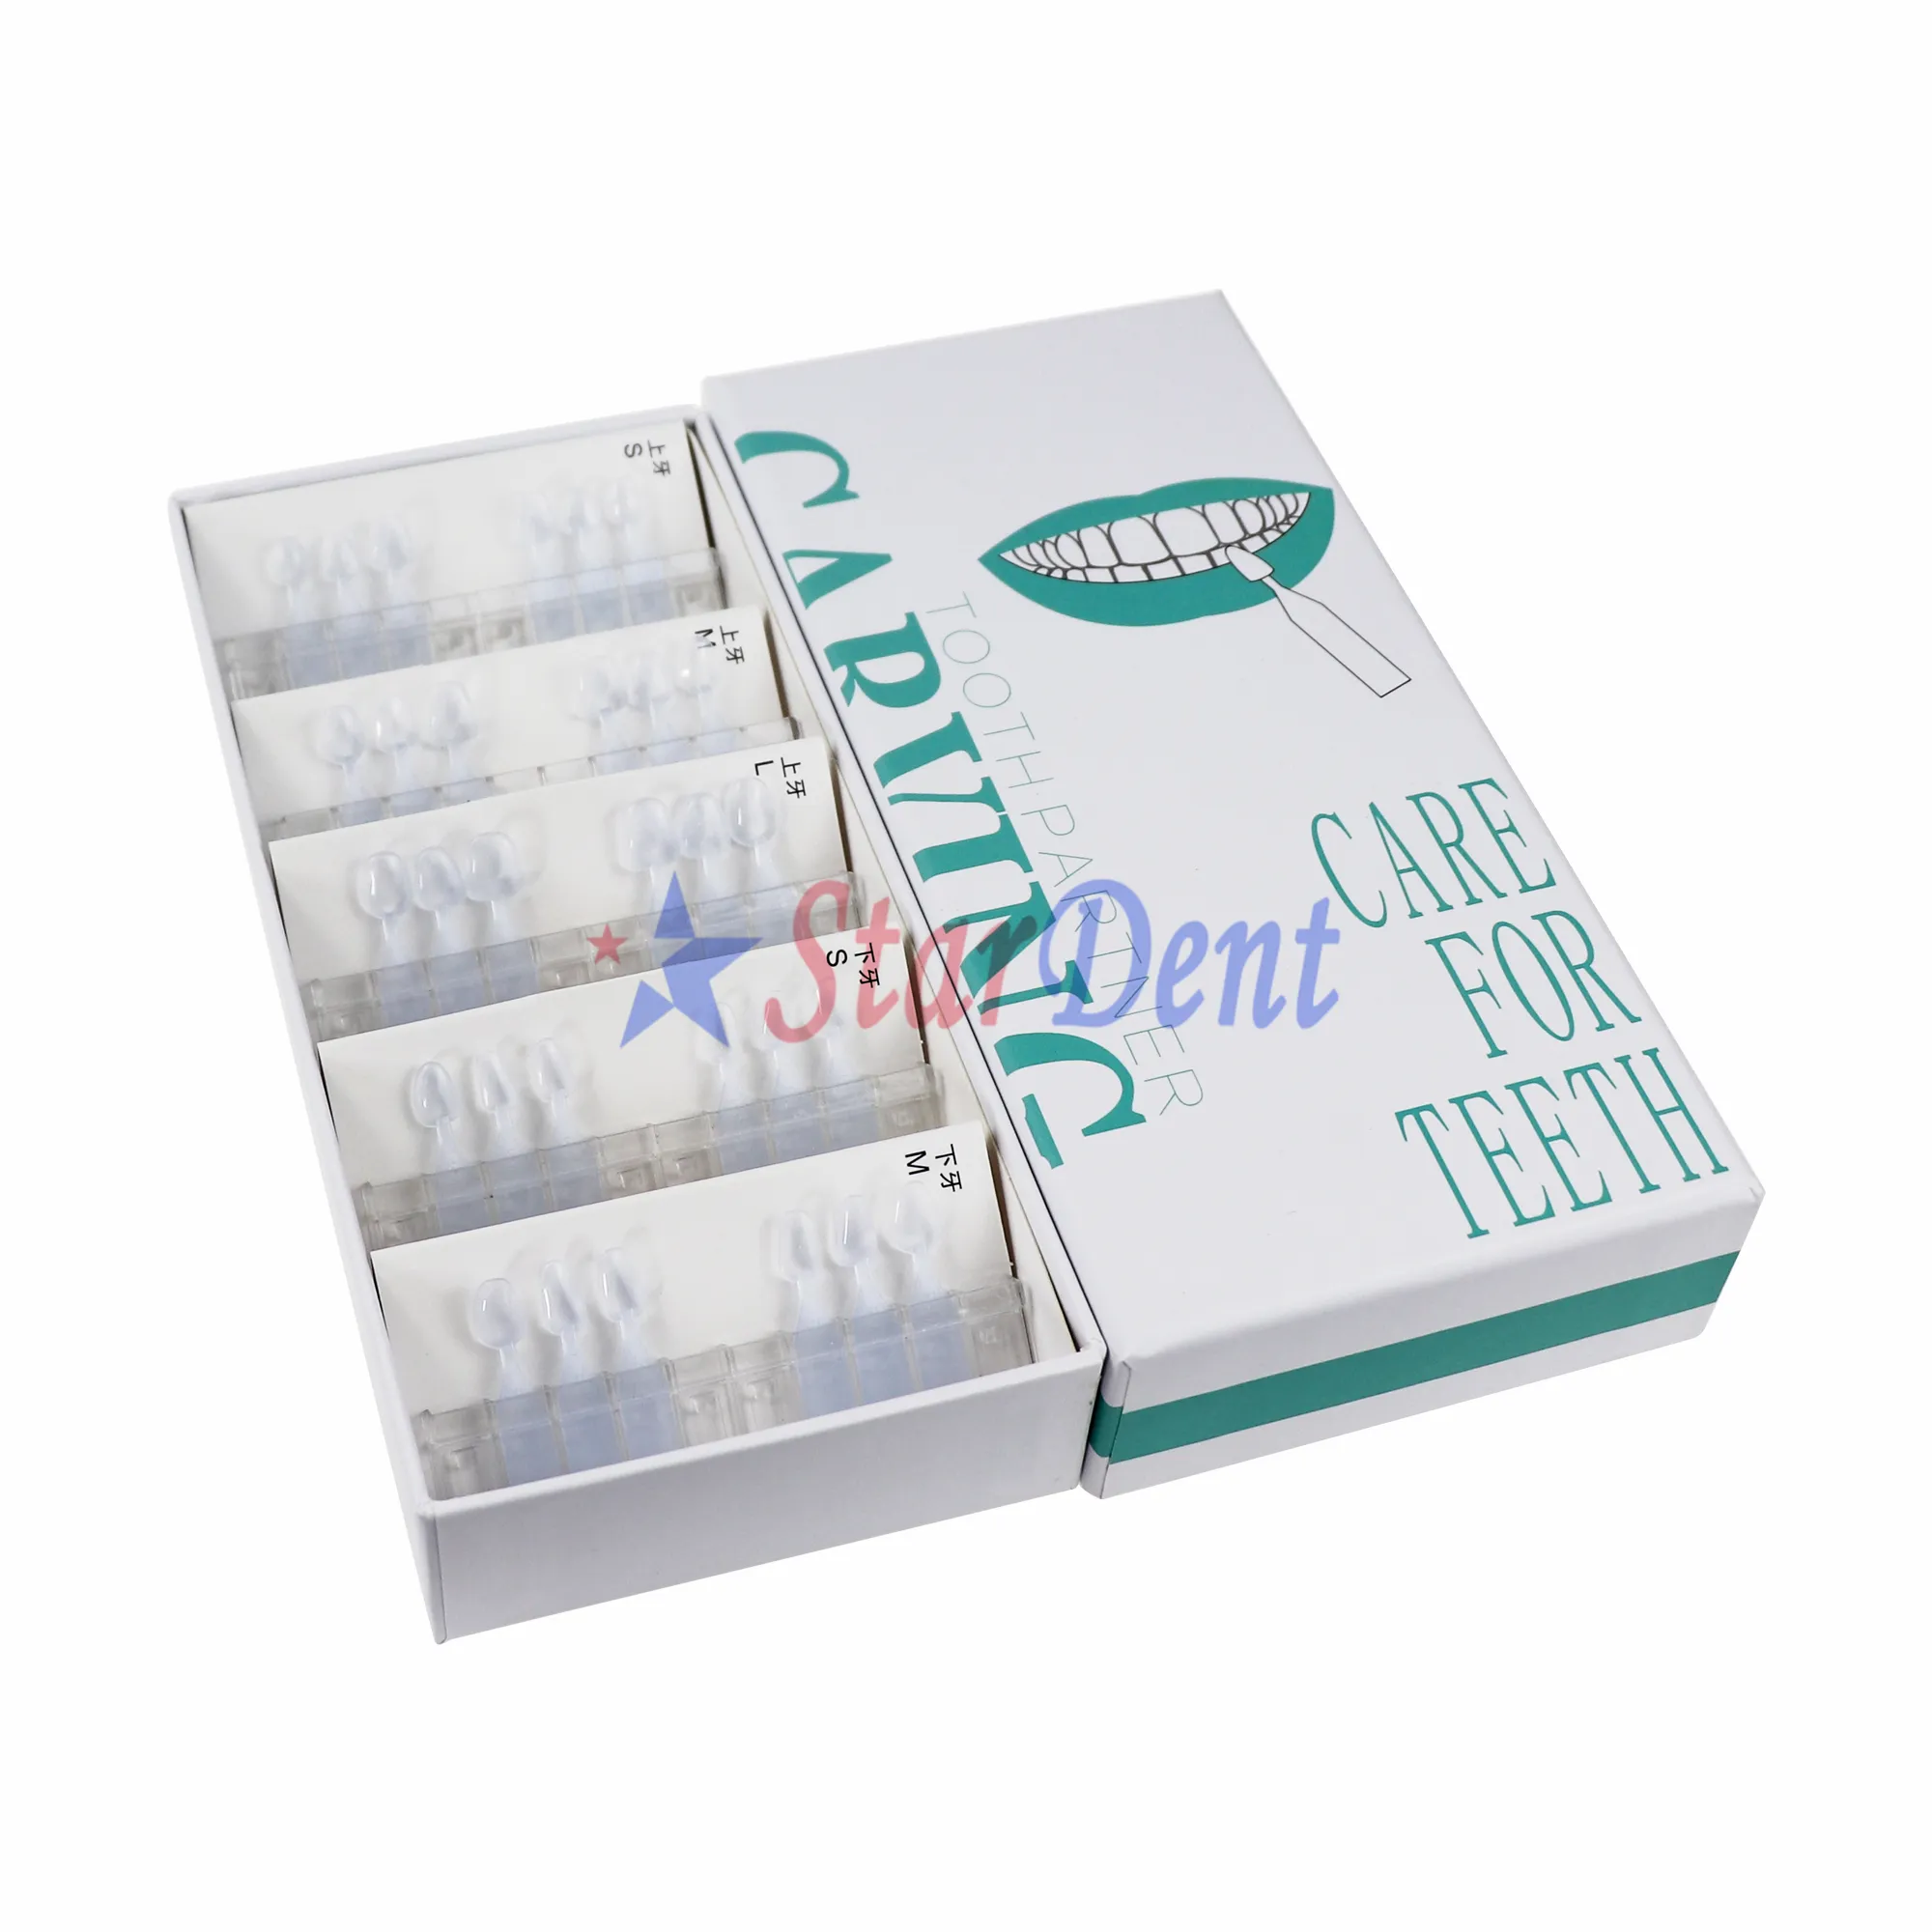 Dental Vollmund zähne Modell 3D Carving Zahn abdeckung Direct Composite Template System Kiefer ortho pä disches Material